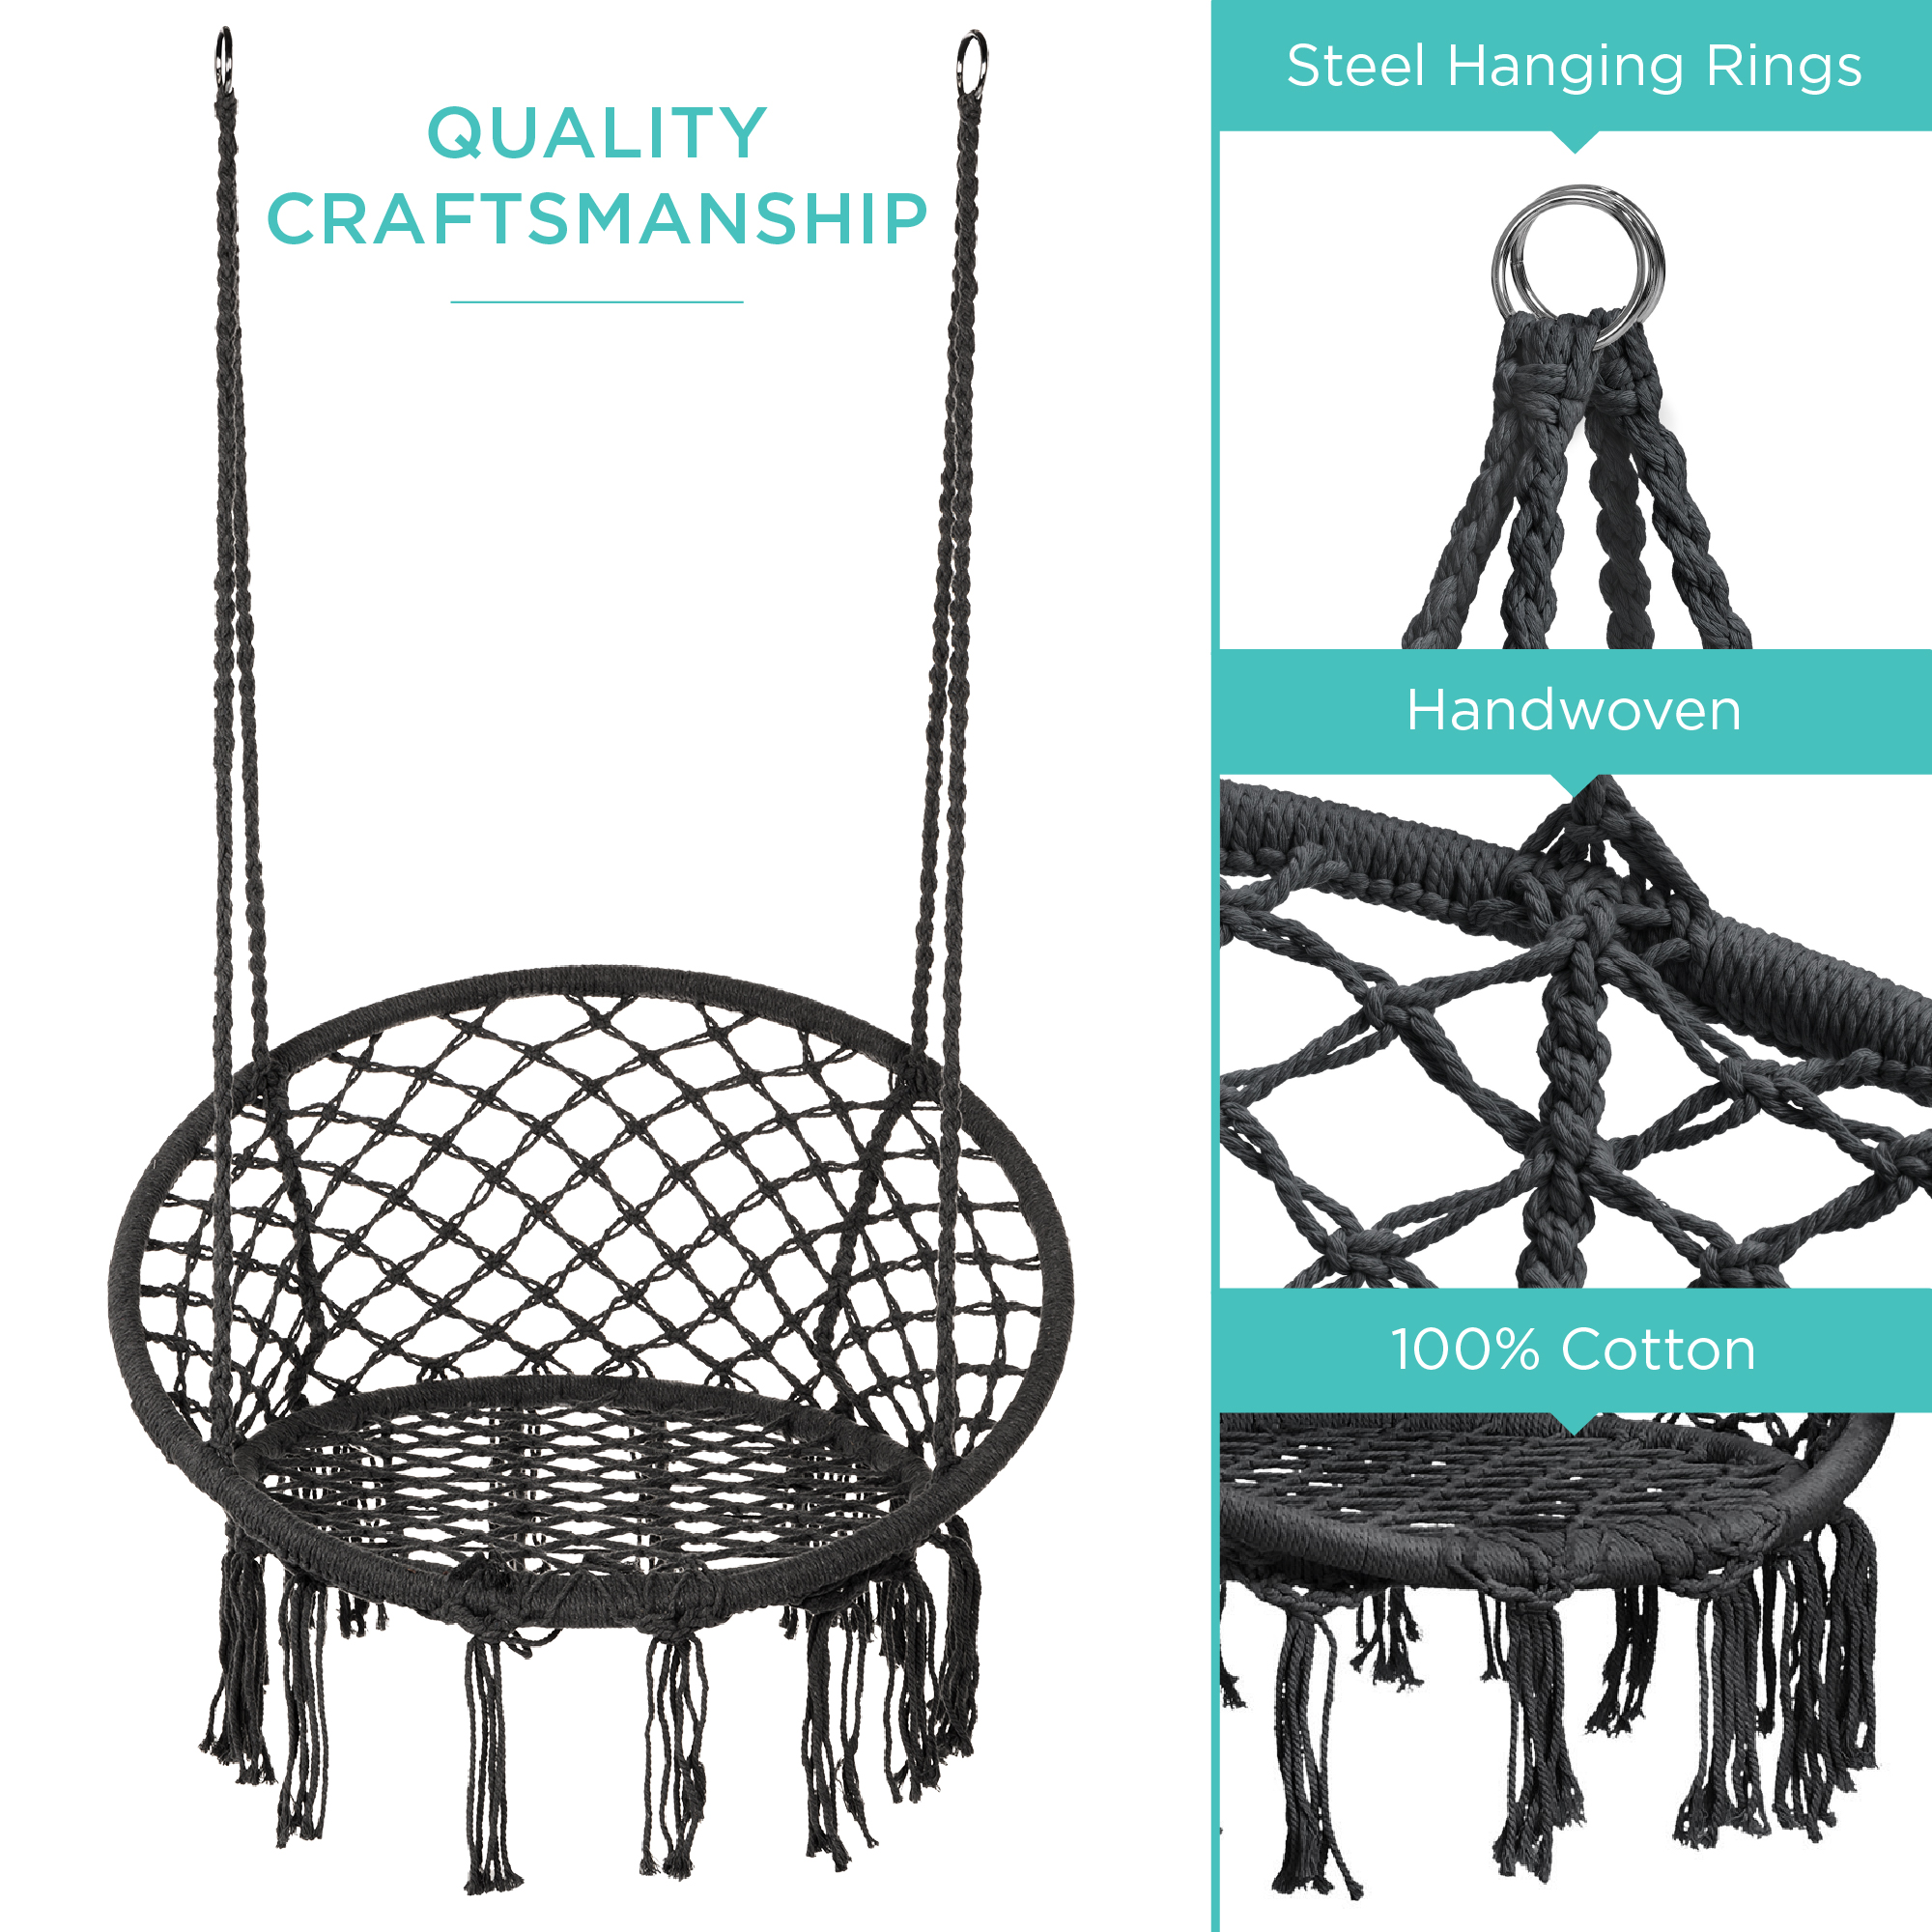 Best Choice Products Handwoven Cotton Macrame Hammock Hanging Chair Swing for Indoor & Outdoor Use w/ Backrest - Black - image 5 of 7